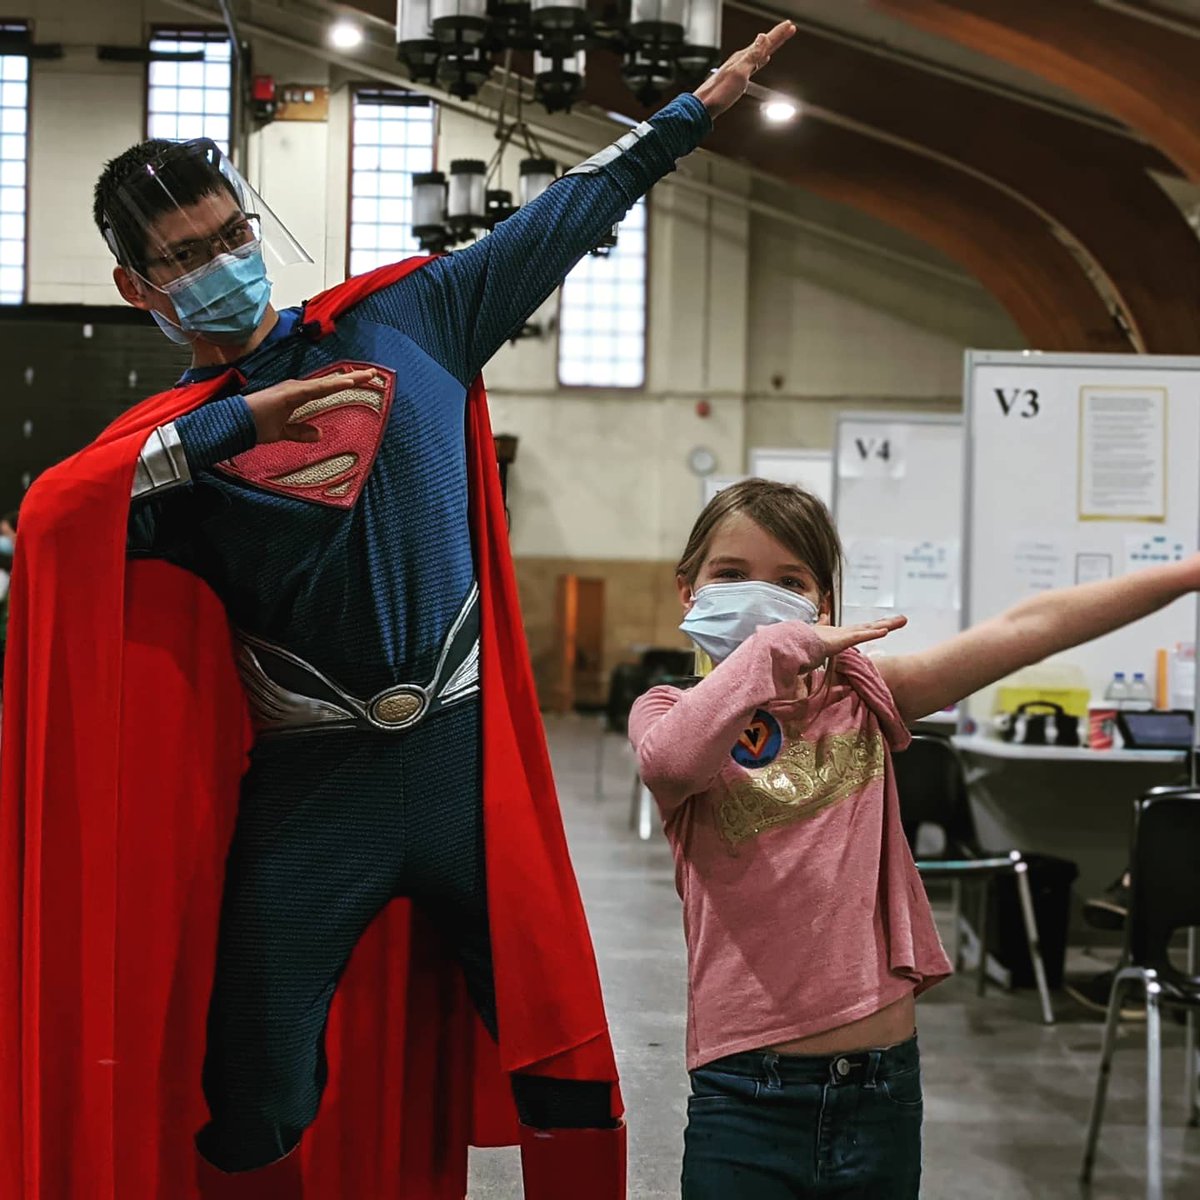 Check it out: Superman is getting his pic taken with this superhero!

#VaccineHeroes #VaccineSuperhero #TBay